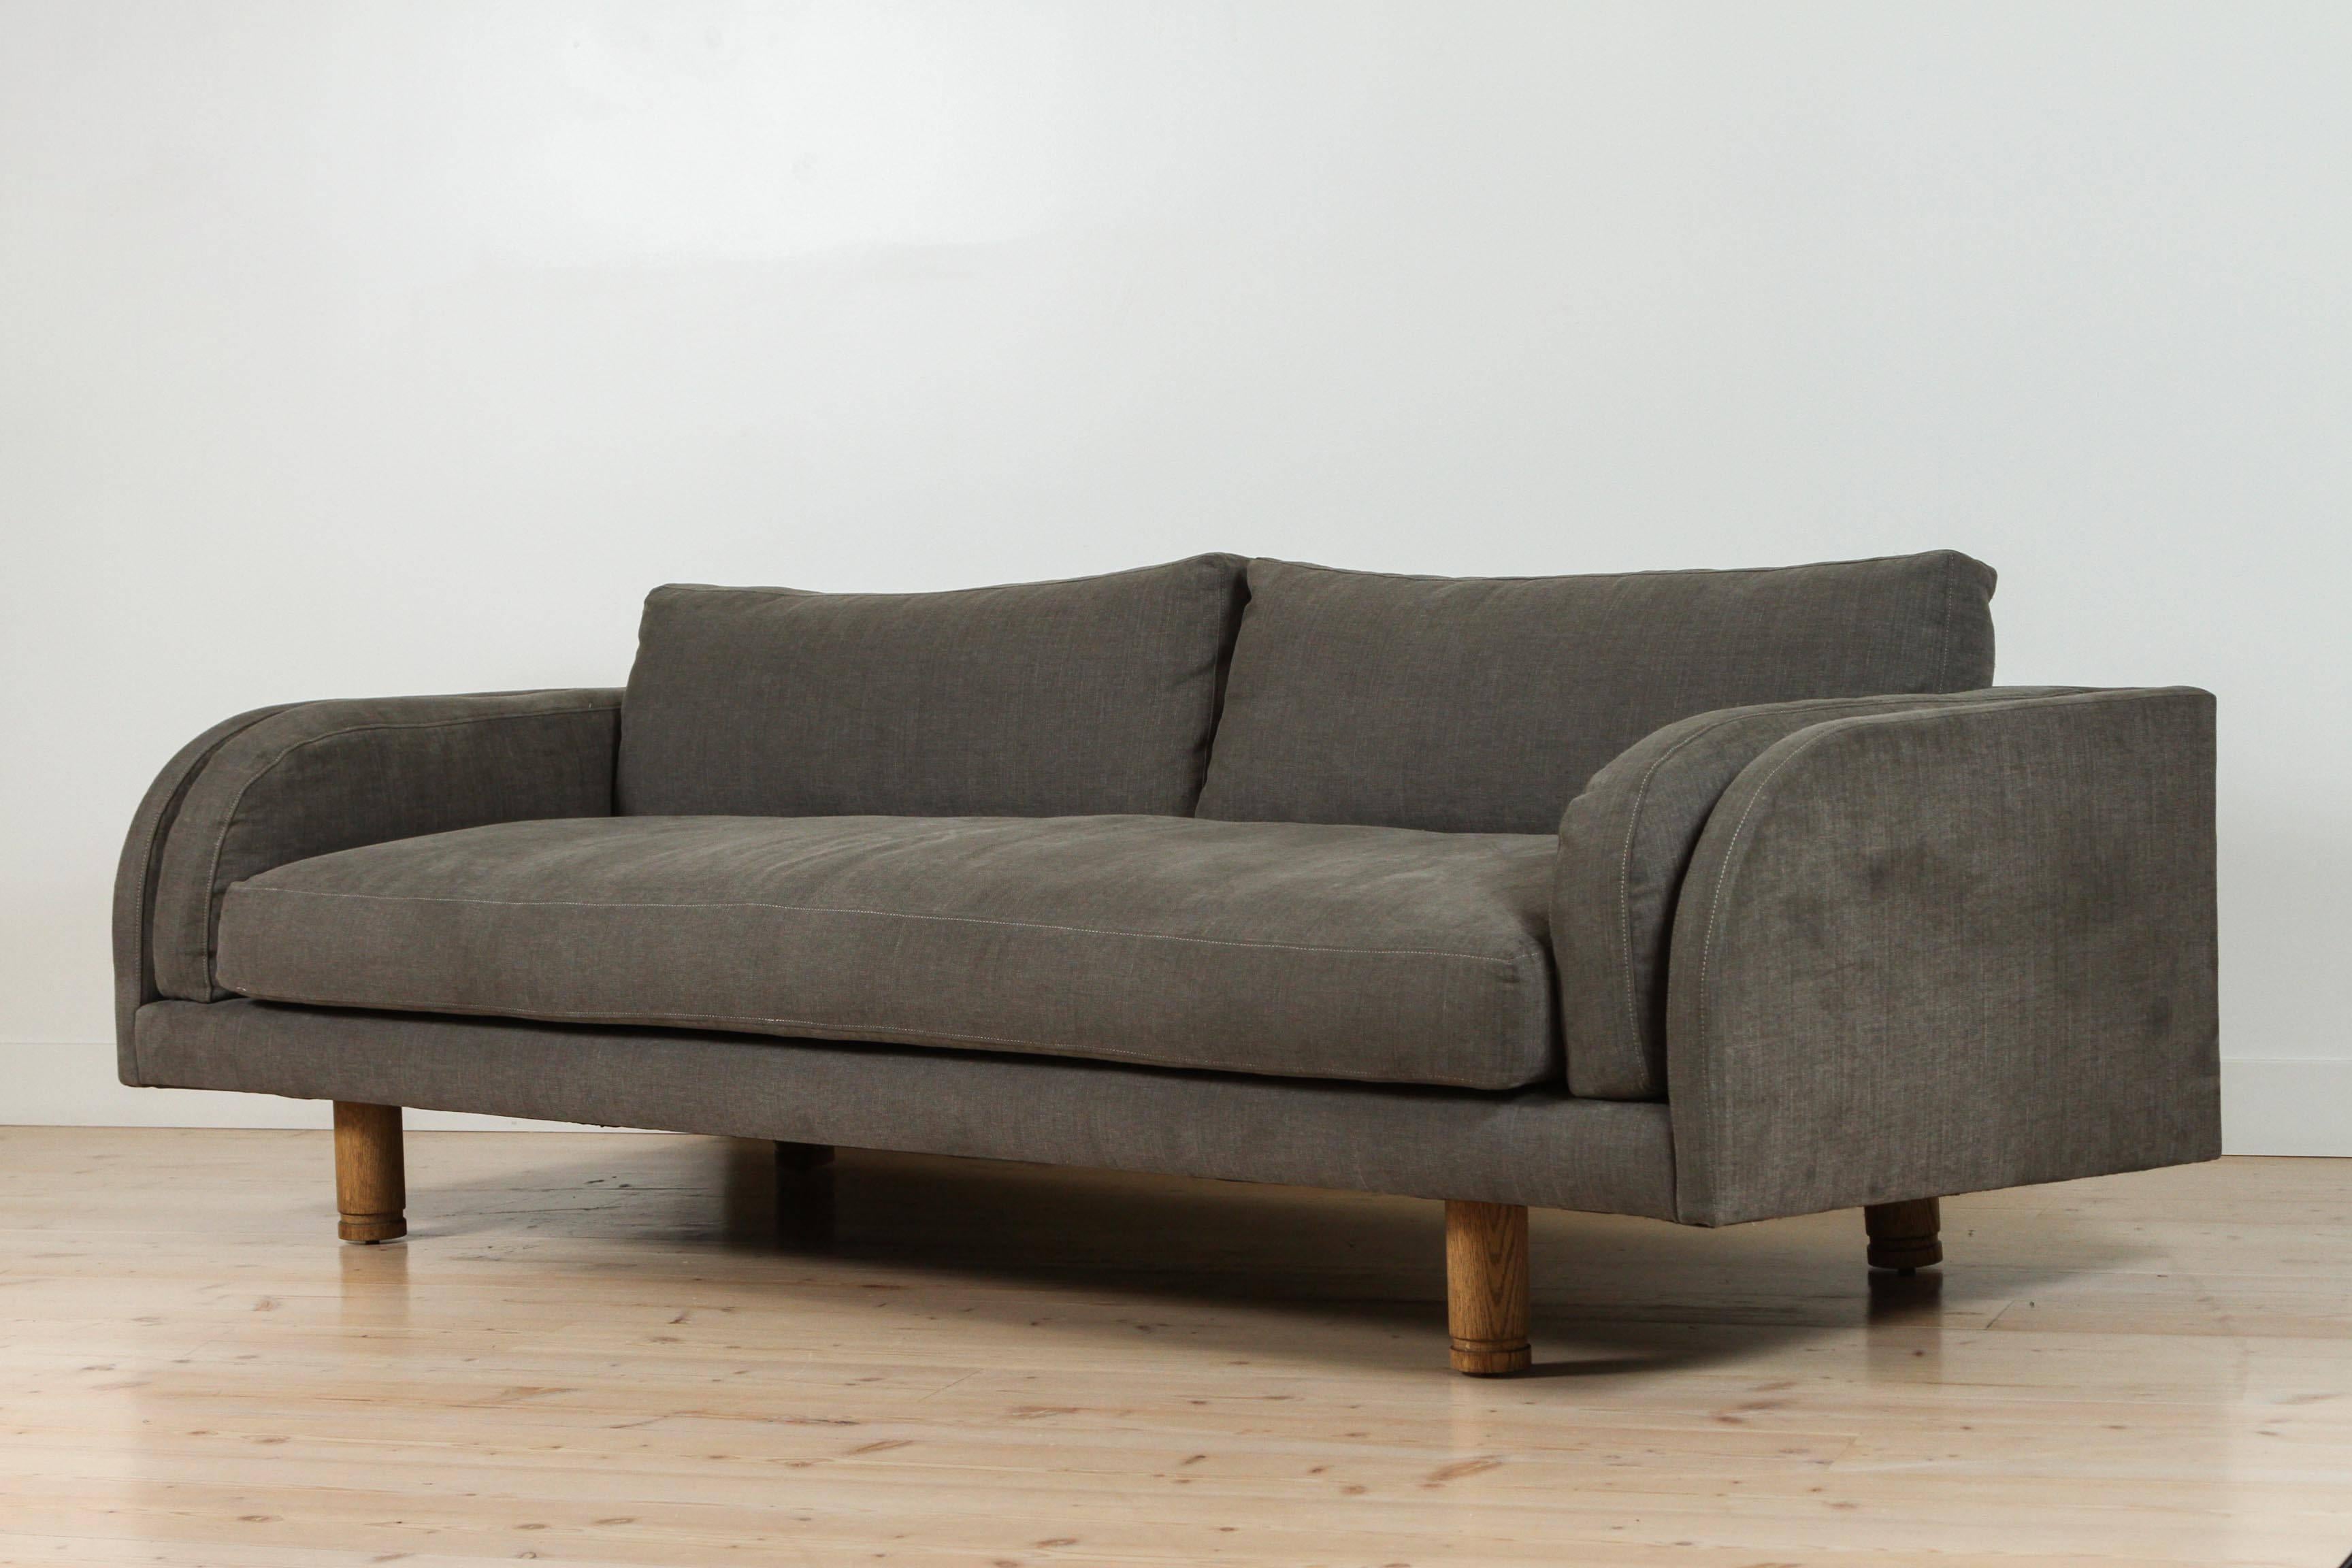 The Moreno Sofa sits low and deep with Italian inspired curved arms. The sofa features loose seat and back cushions and two side cushions that mimic the curvature of the arms. The legs have an incised detail and are made of solid American walnut or